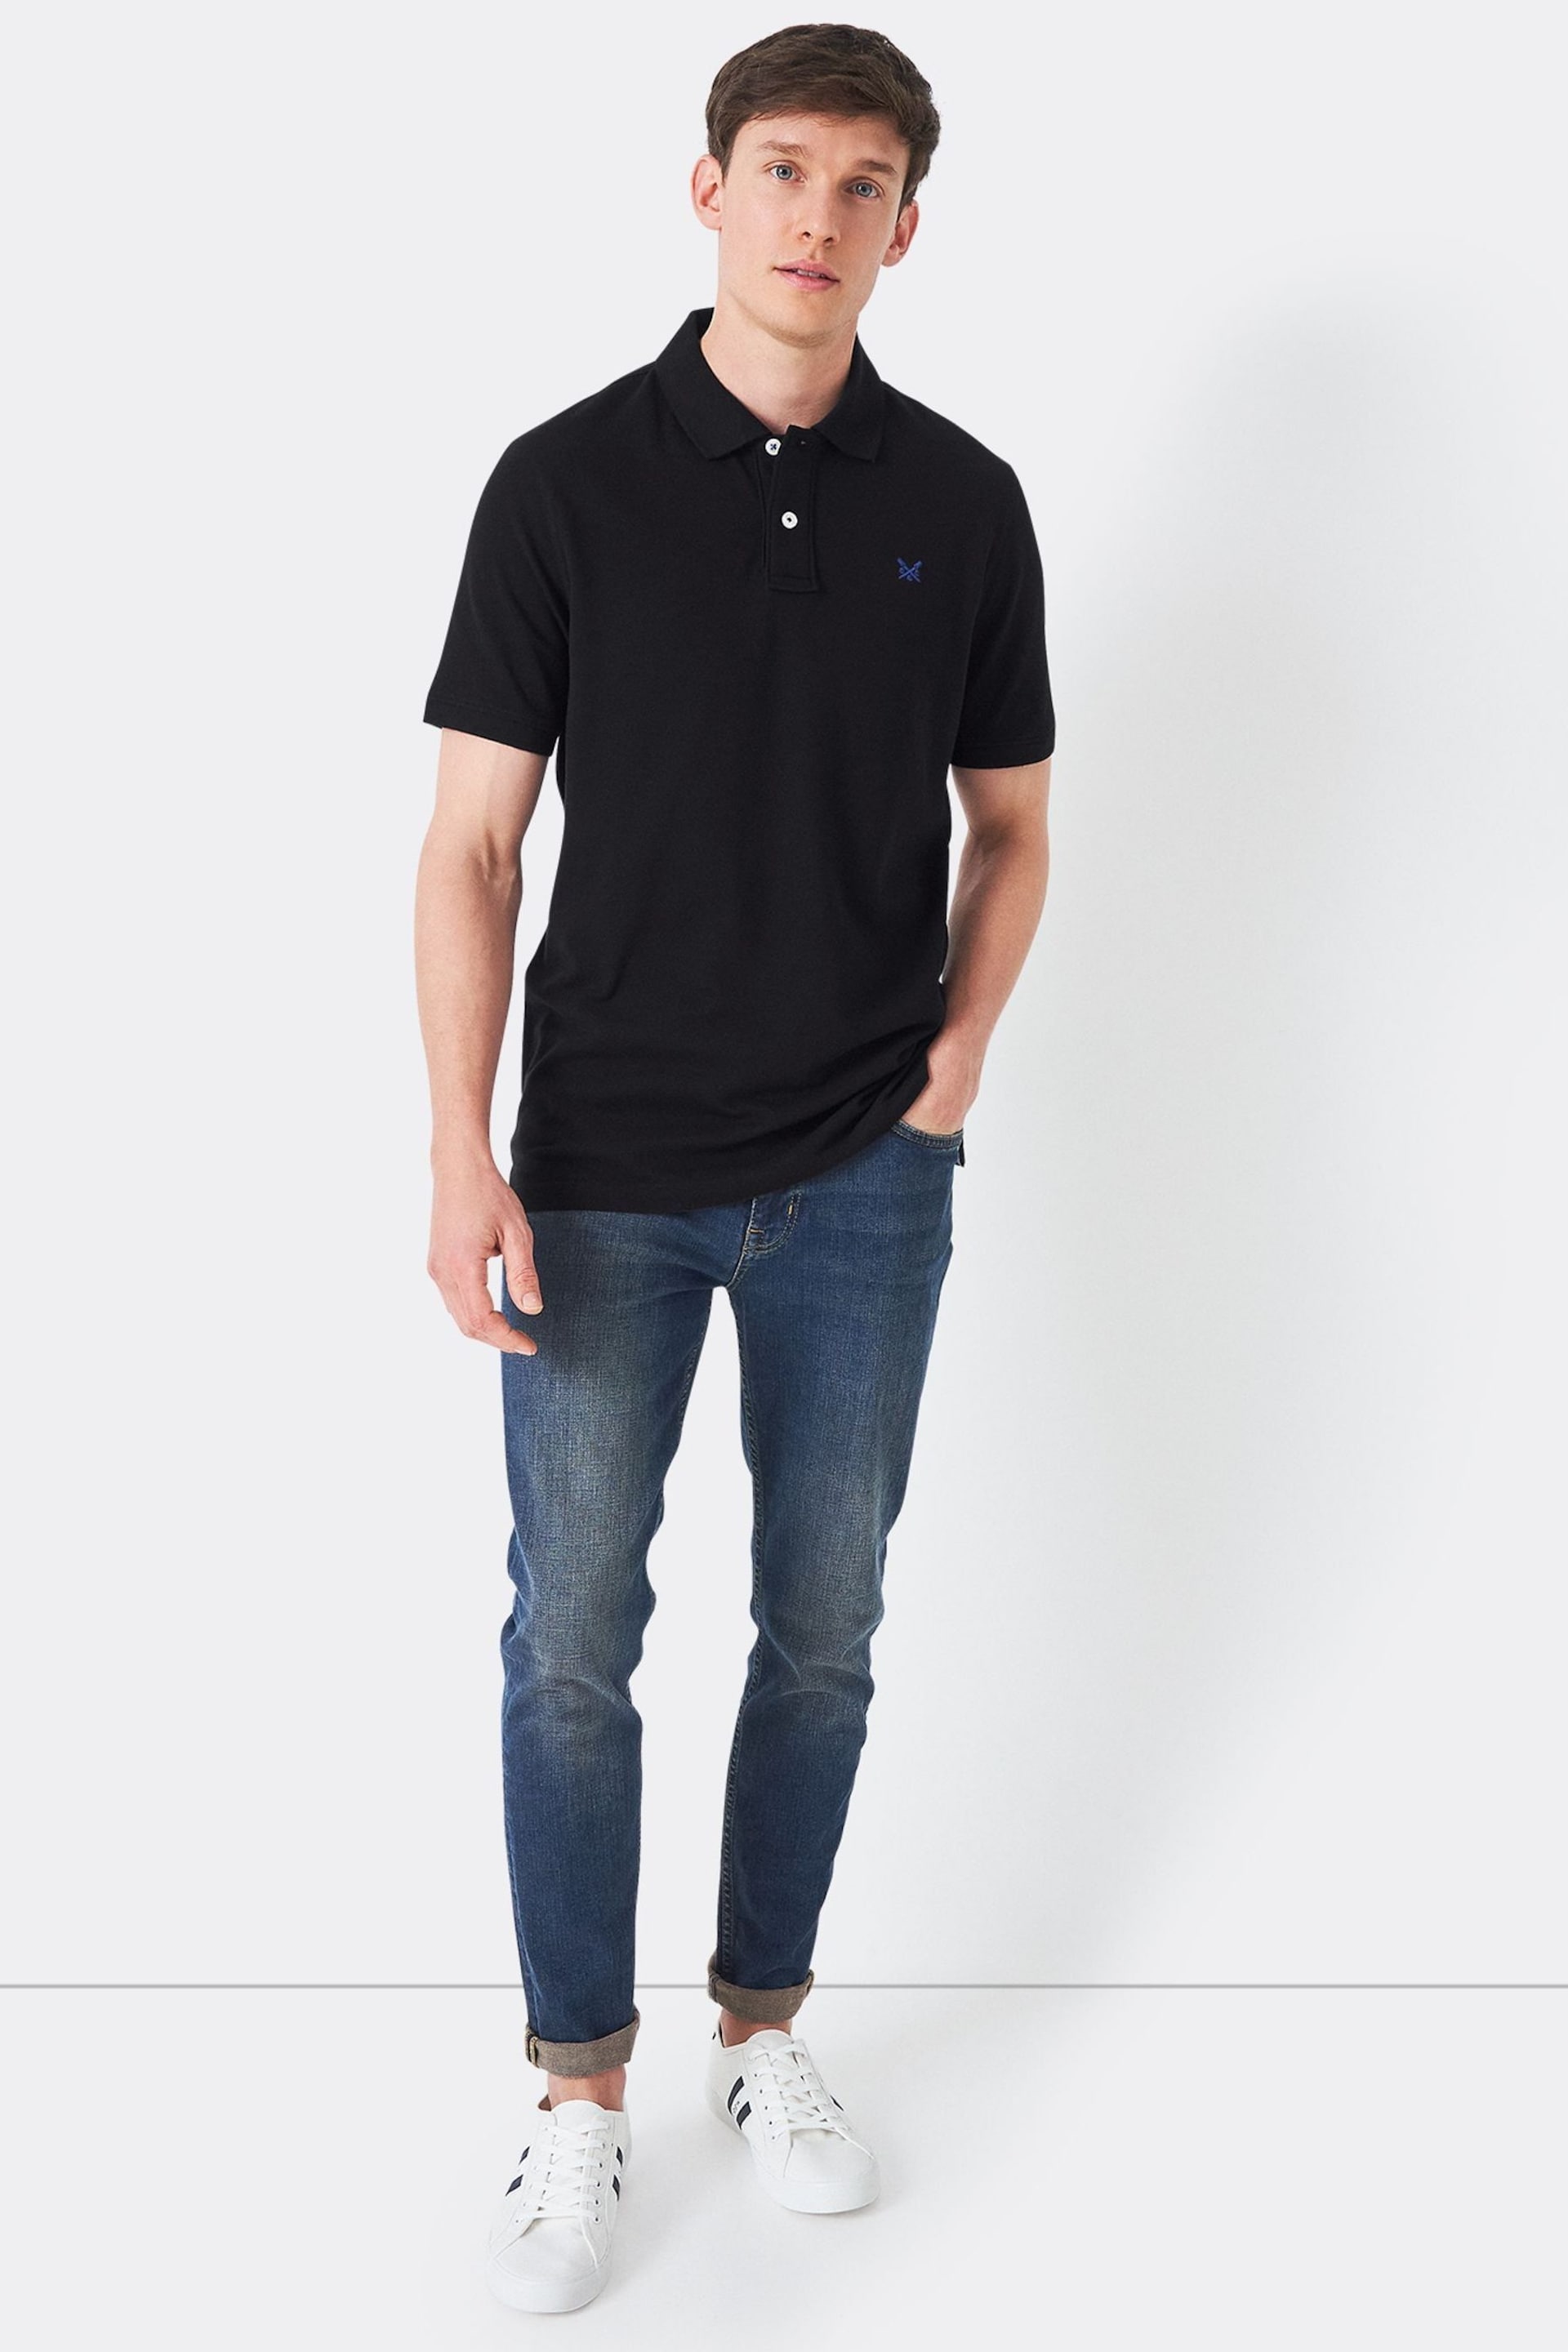 Crew Clothing Classic Pique Polo Shirt - Image 2 of 5